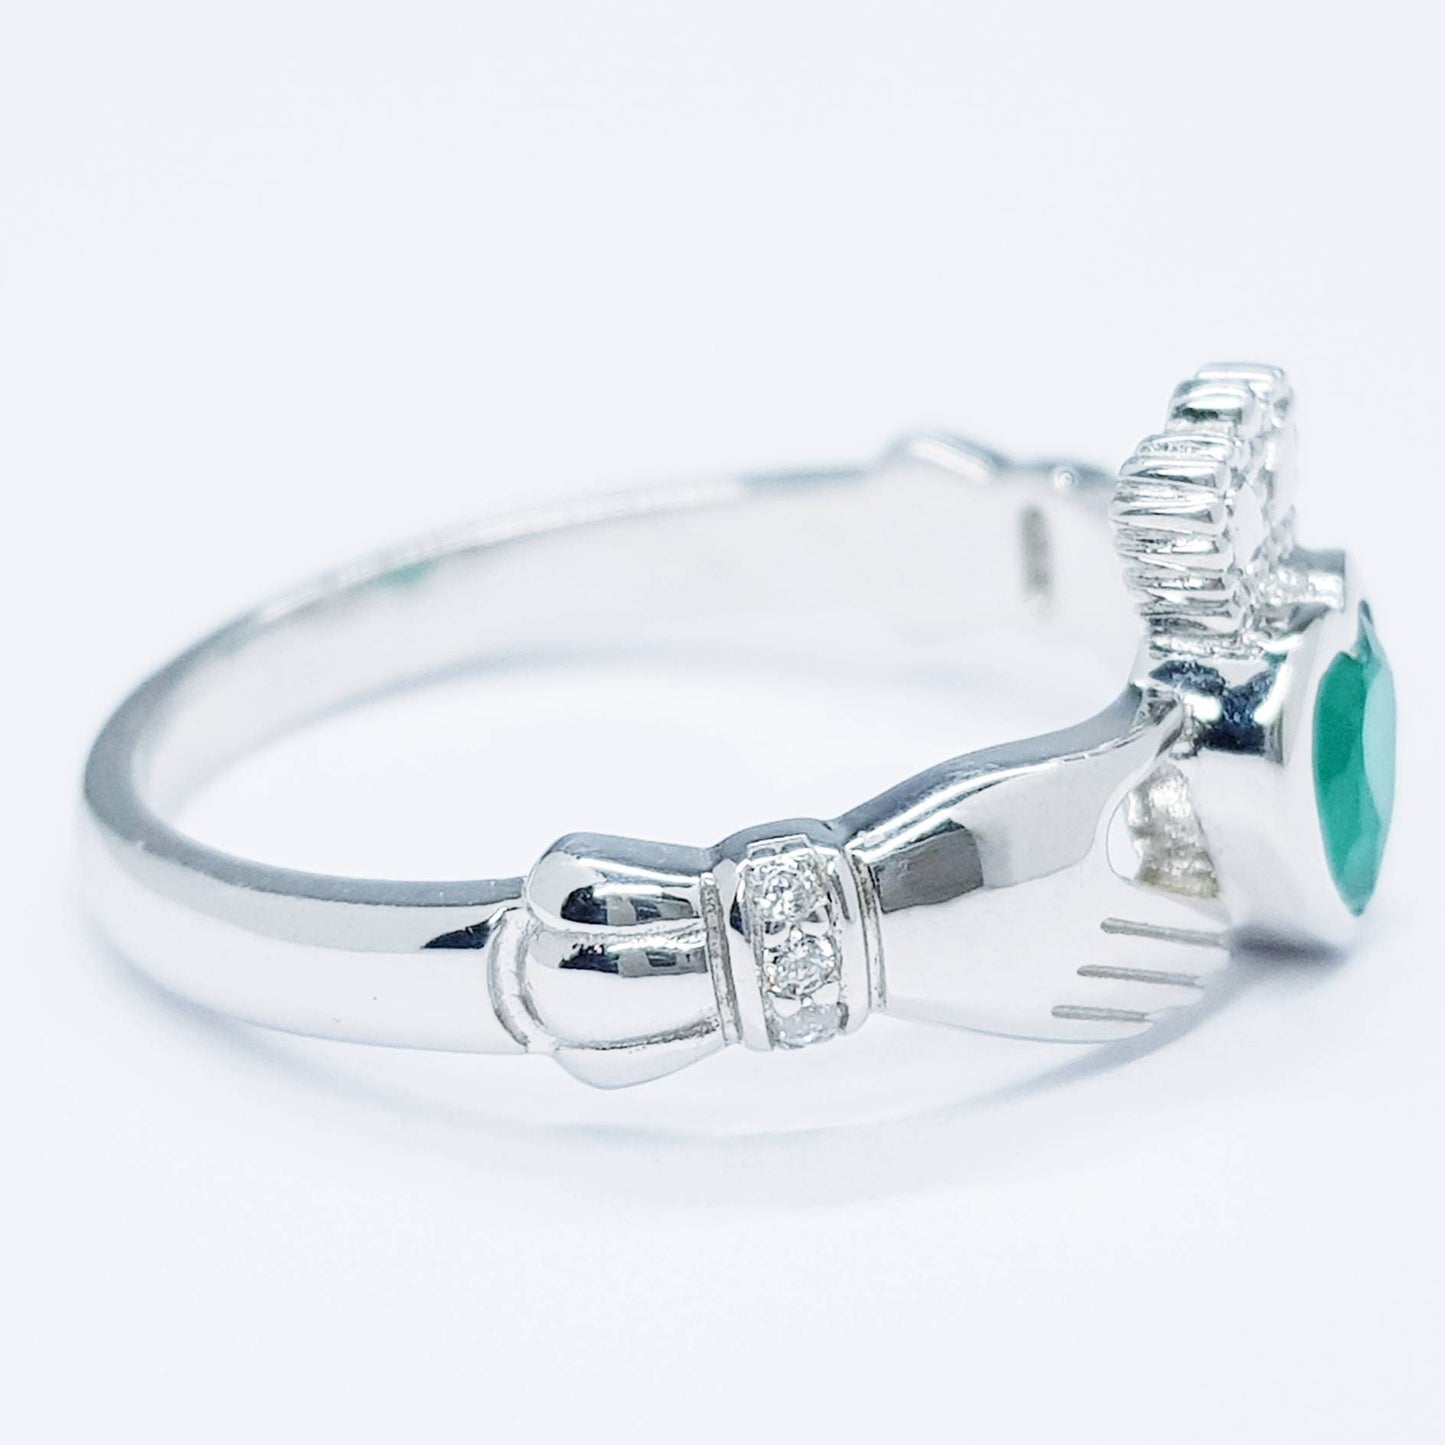 Sterling Silver Claddagh ring set with emerald green heart shaped stone, may birthstone claddagh ring from Ireland